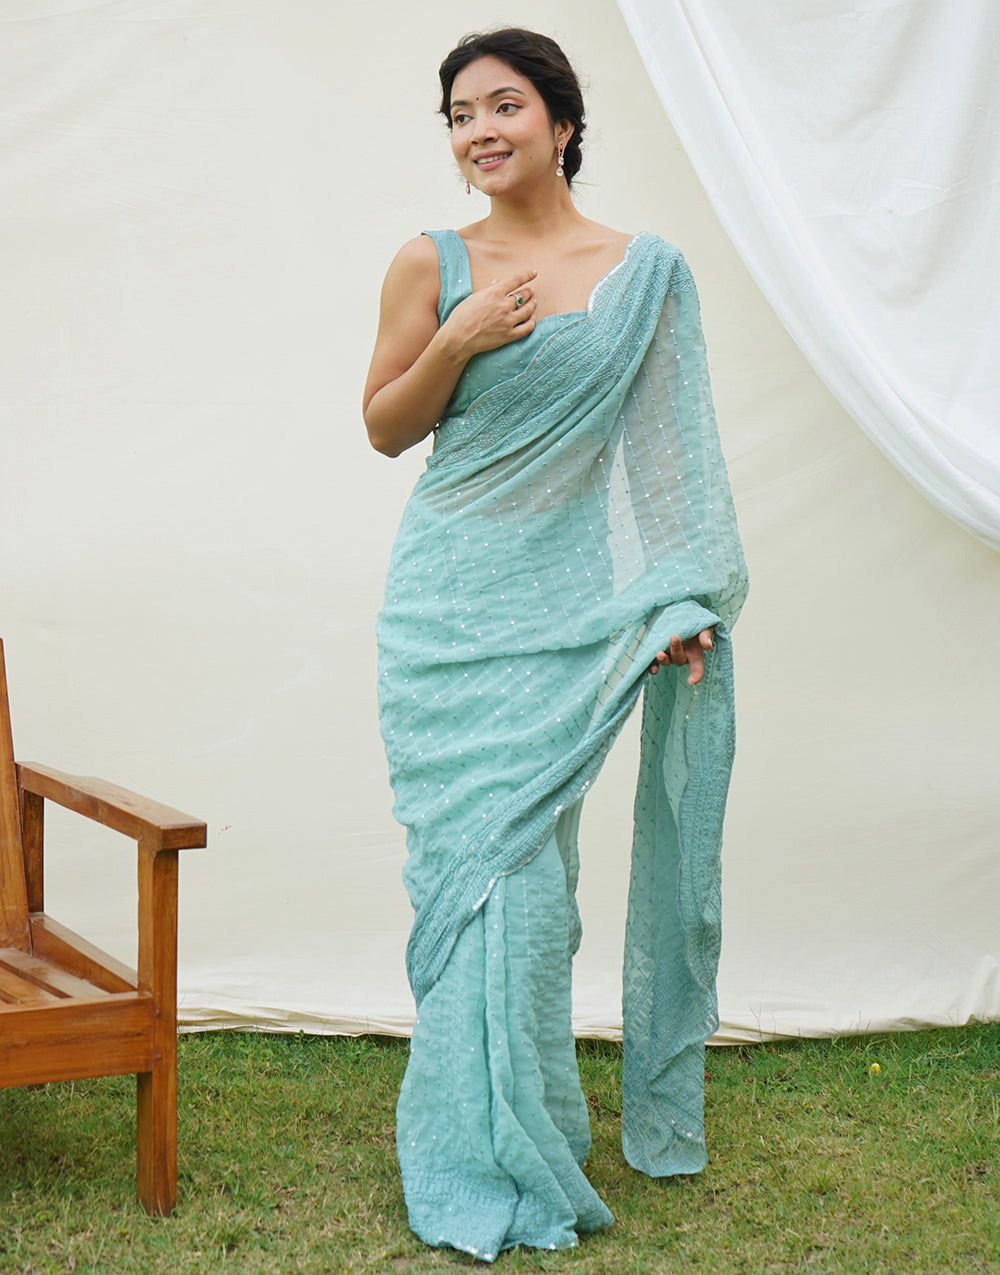 Light Teal Georgette Saree With Embroidery sequence work